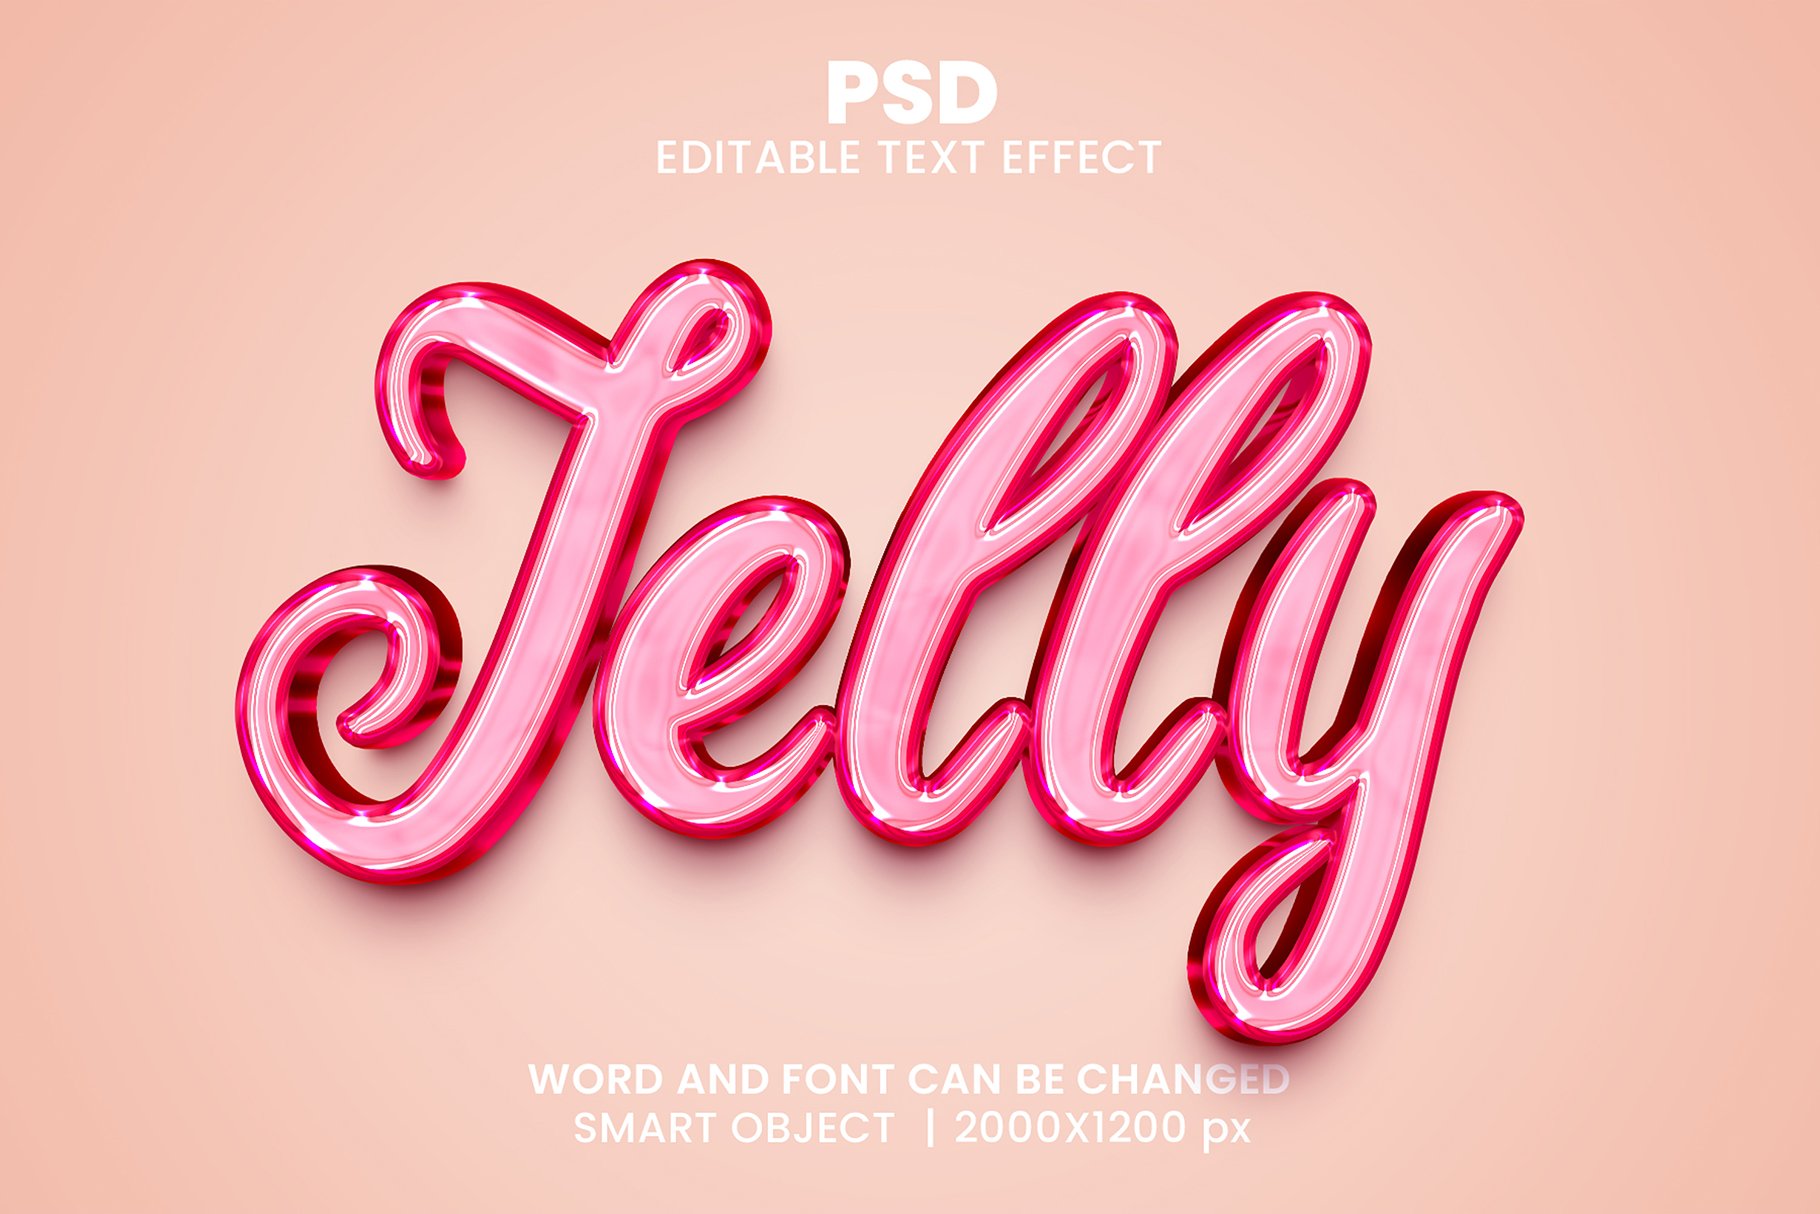 Jelly 3d Editable Psd Text Effectcover image.